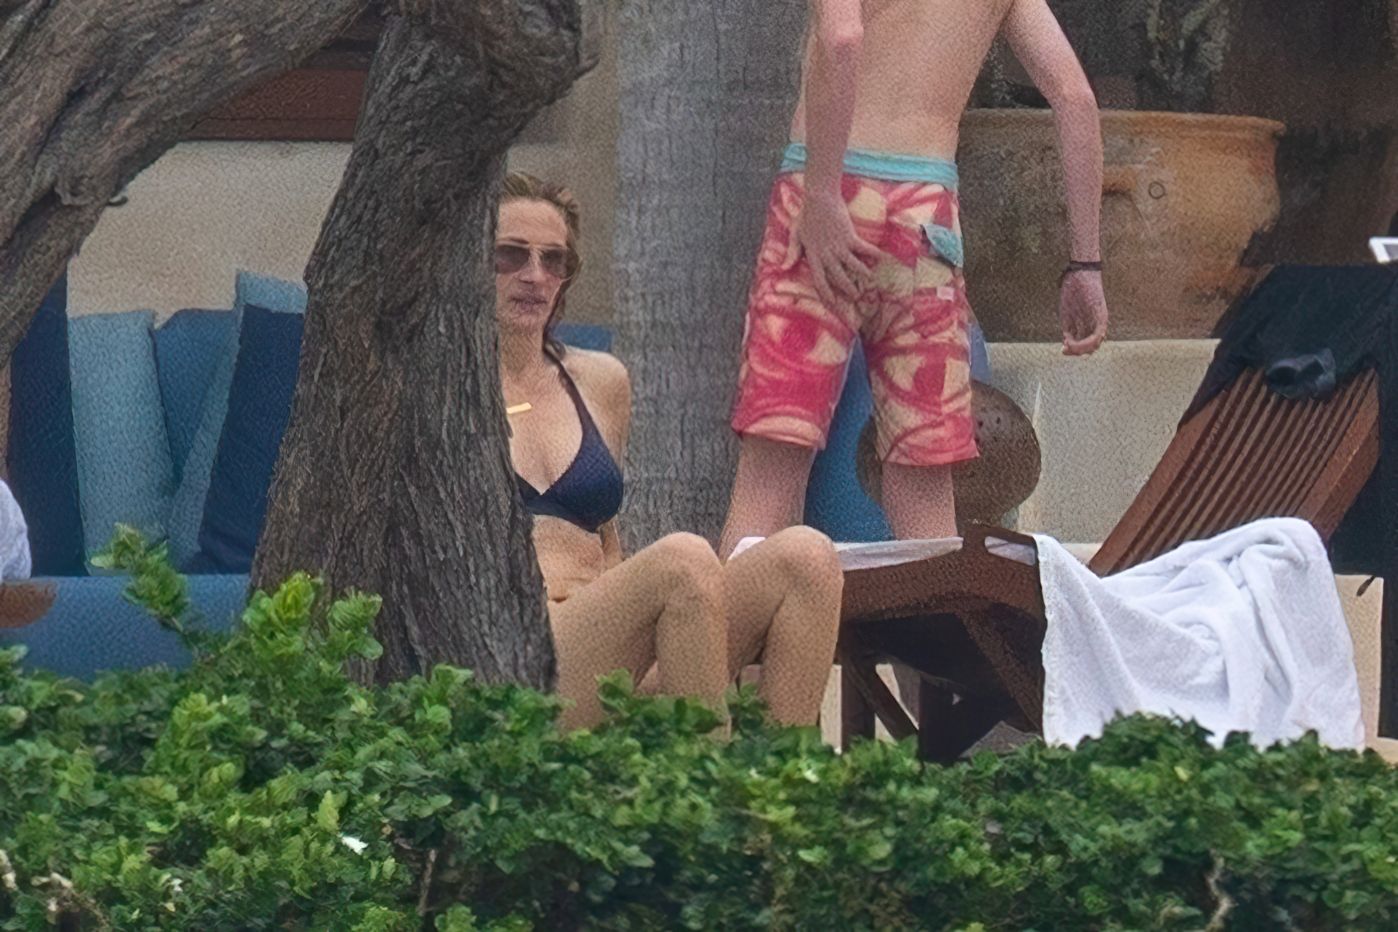 Julia Roberts Enjoys Some Vacation Time in Mexico (14 Photos)